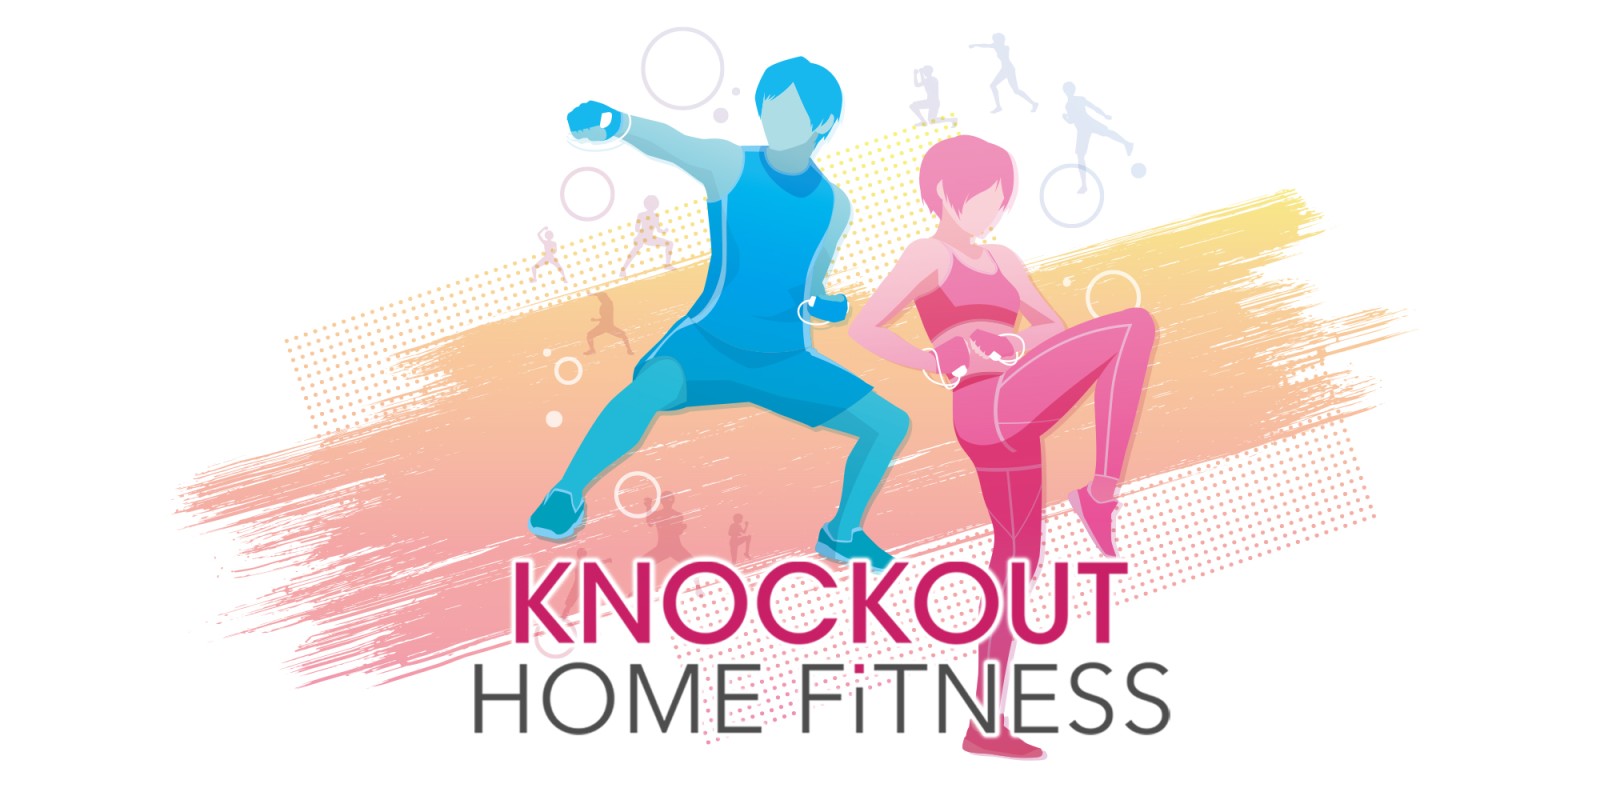 Knock out home fitness, sport. Nintendo switch, game